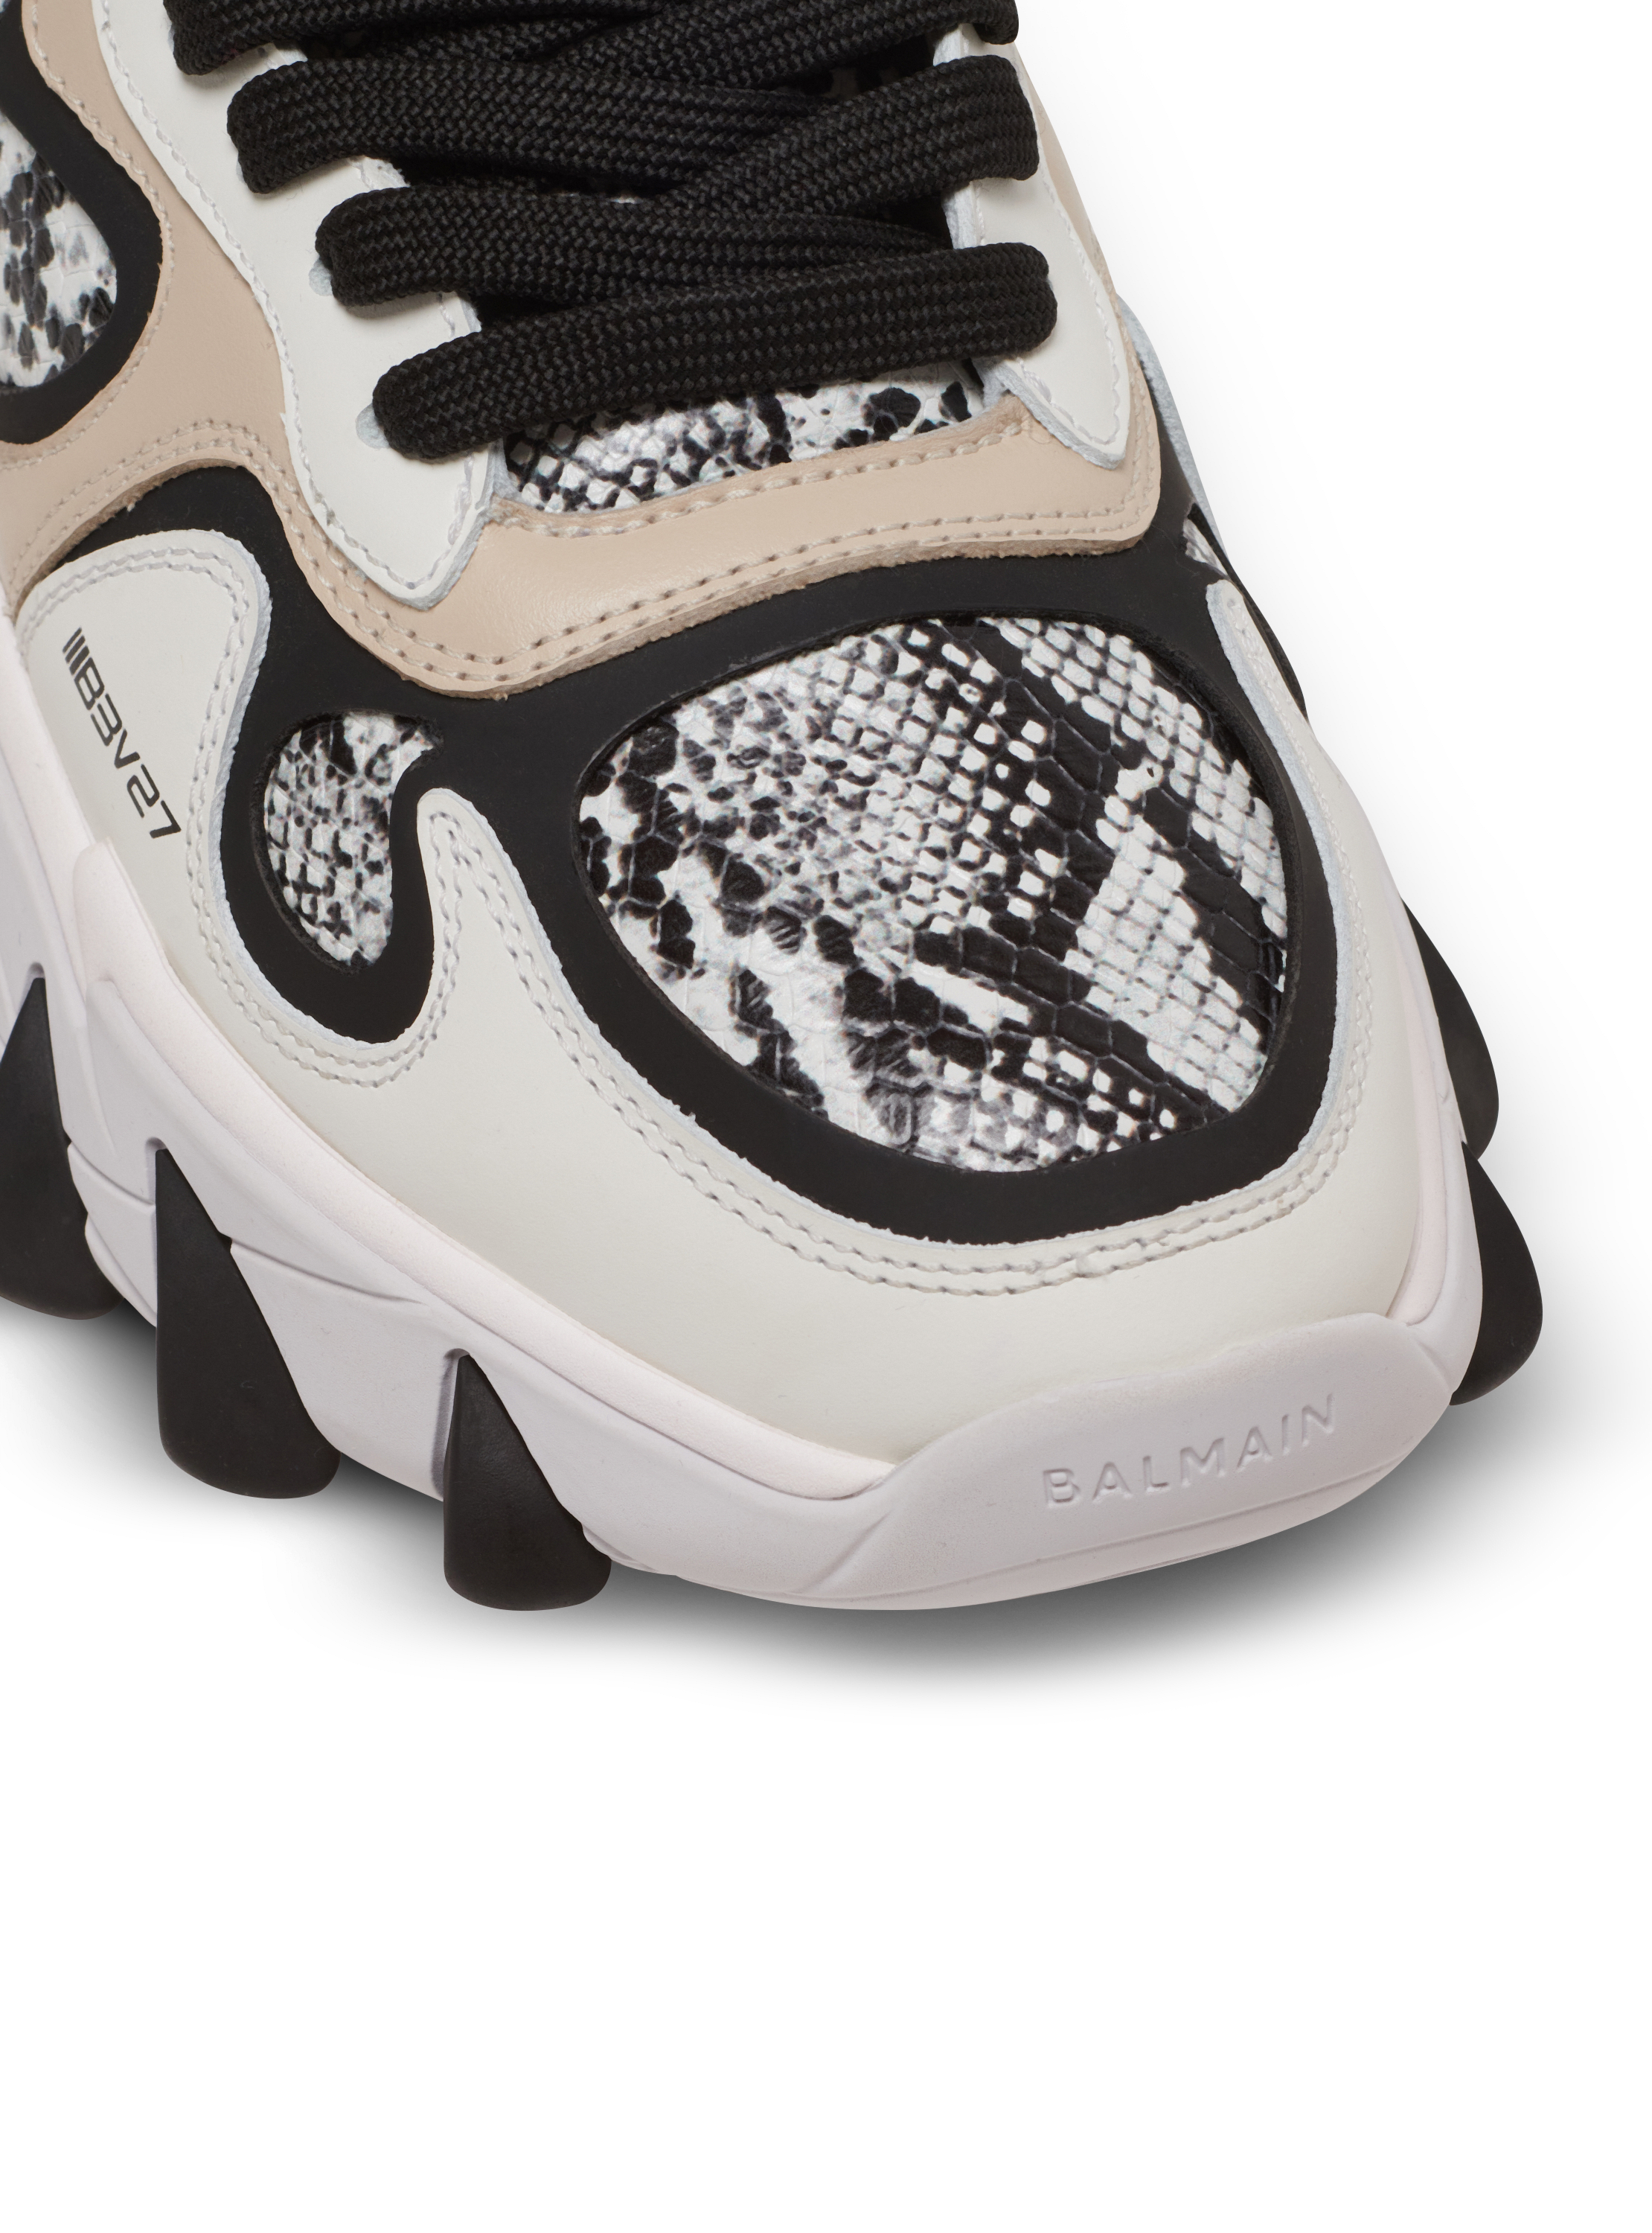 B-East snakeskin-effect leather, suede and mesh trainers